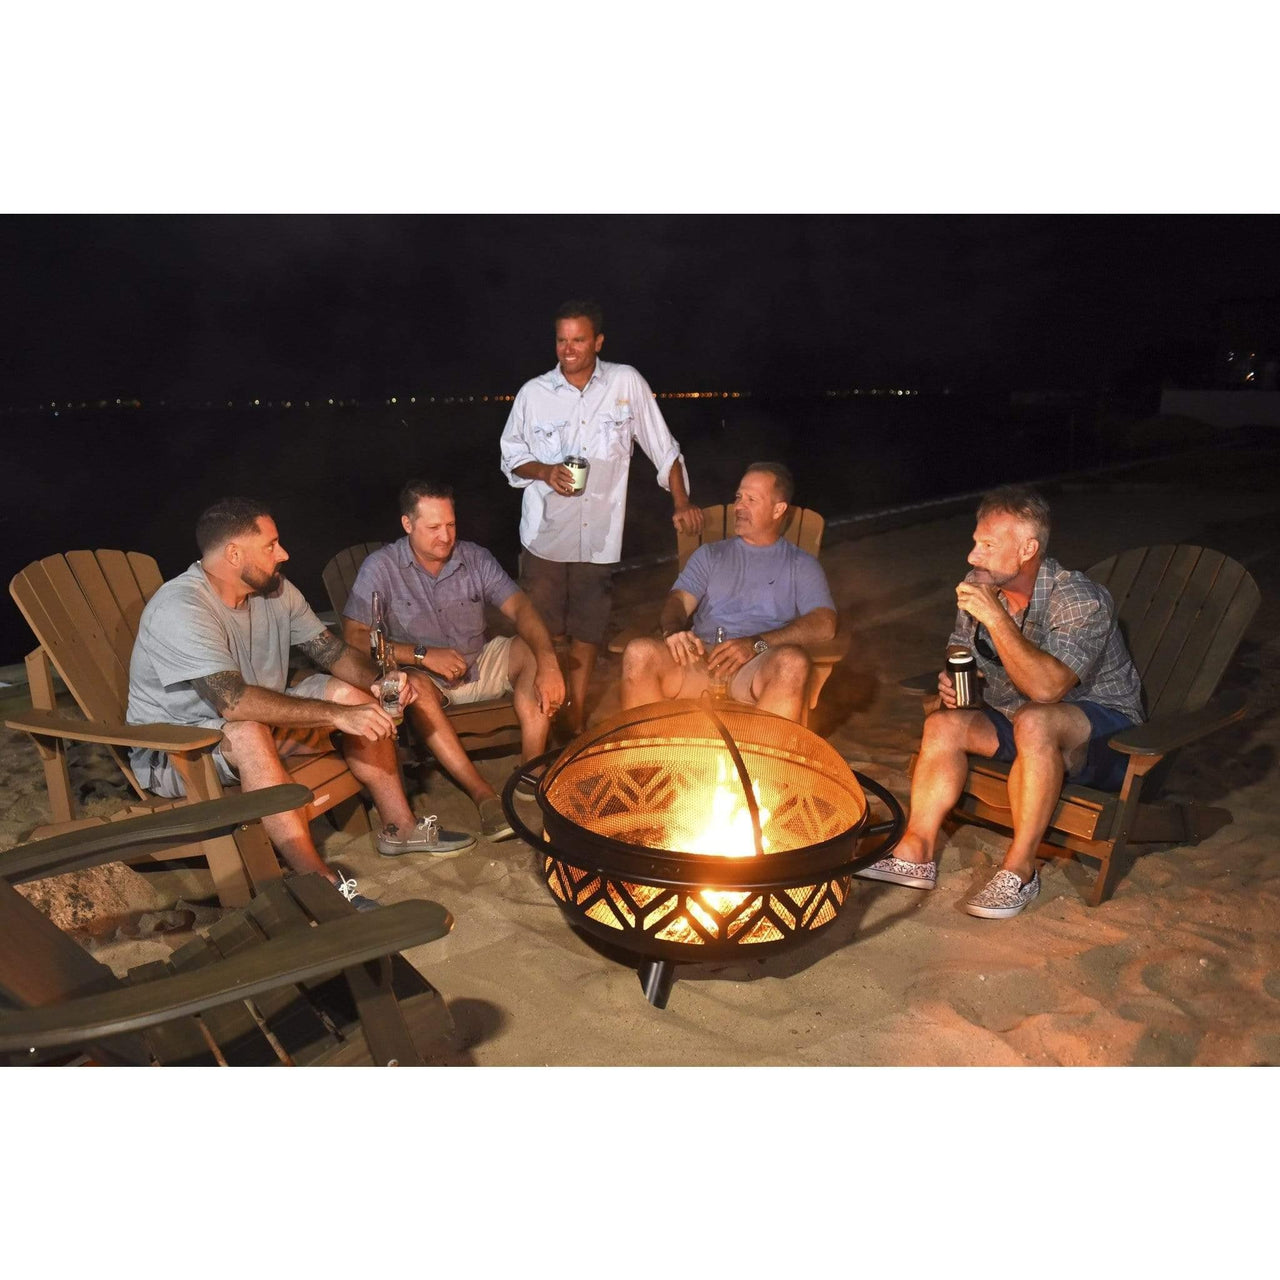 Endless Summer Oil Rubbed Bronze Wood Burning Outdoor Firebowl With Geometric Design - WAD1009SP - Fire Pit Stock